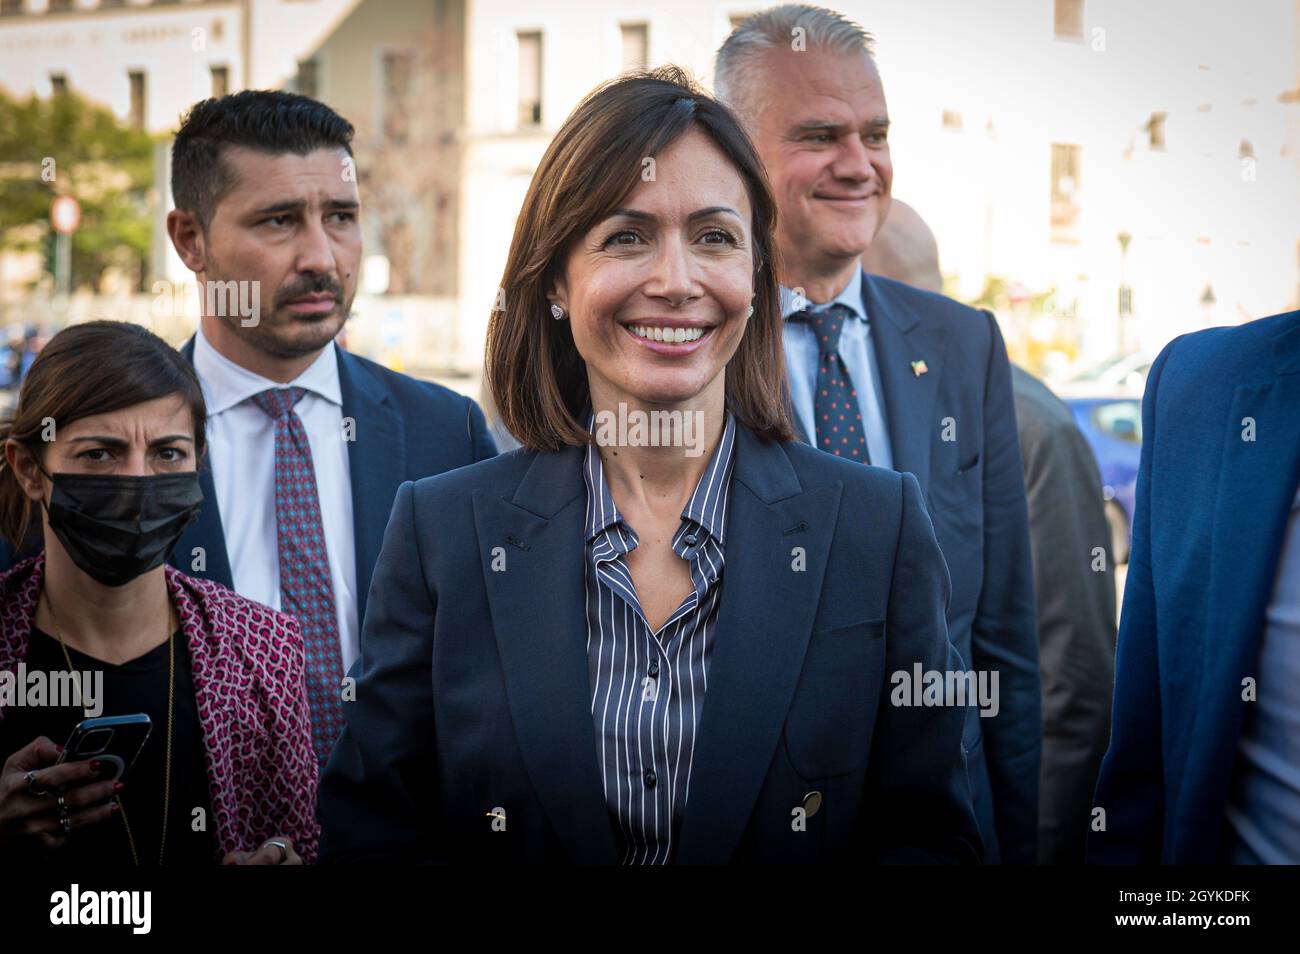 Turin, Italy. 08th Oct, 2021. Mara Carfagna, Minister for the South and territorial cohesion, smiles as she arrives at piazza Bengasi for an electoral event part of her institutional visit to Turin. Credit: Nicolò Campo/Alamy Live News Stock Photo